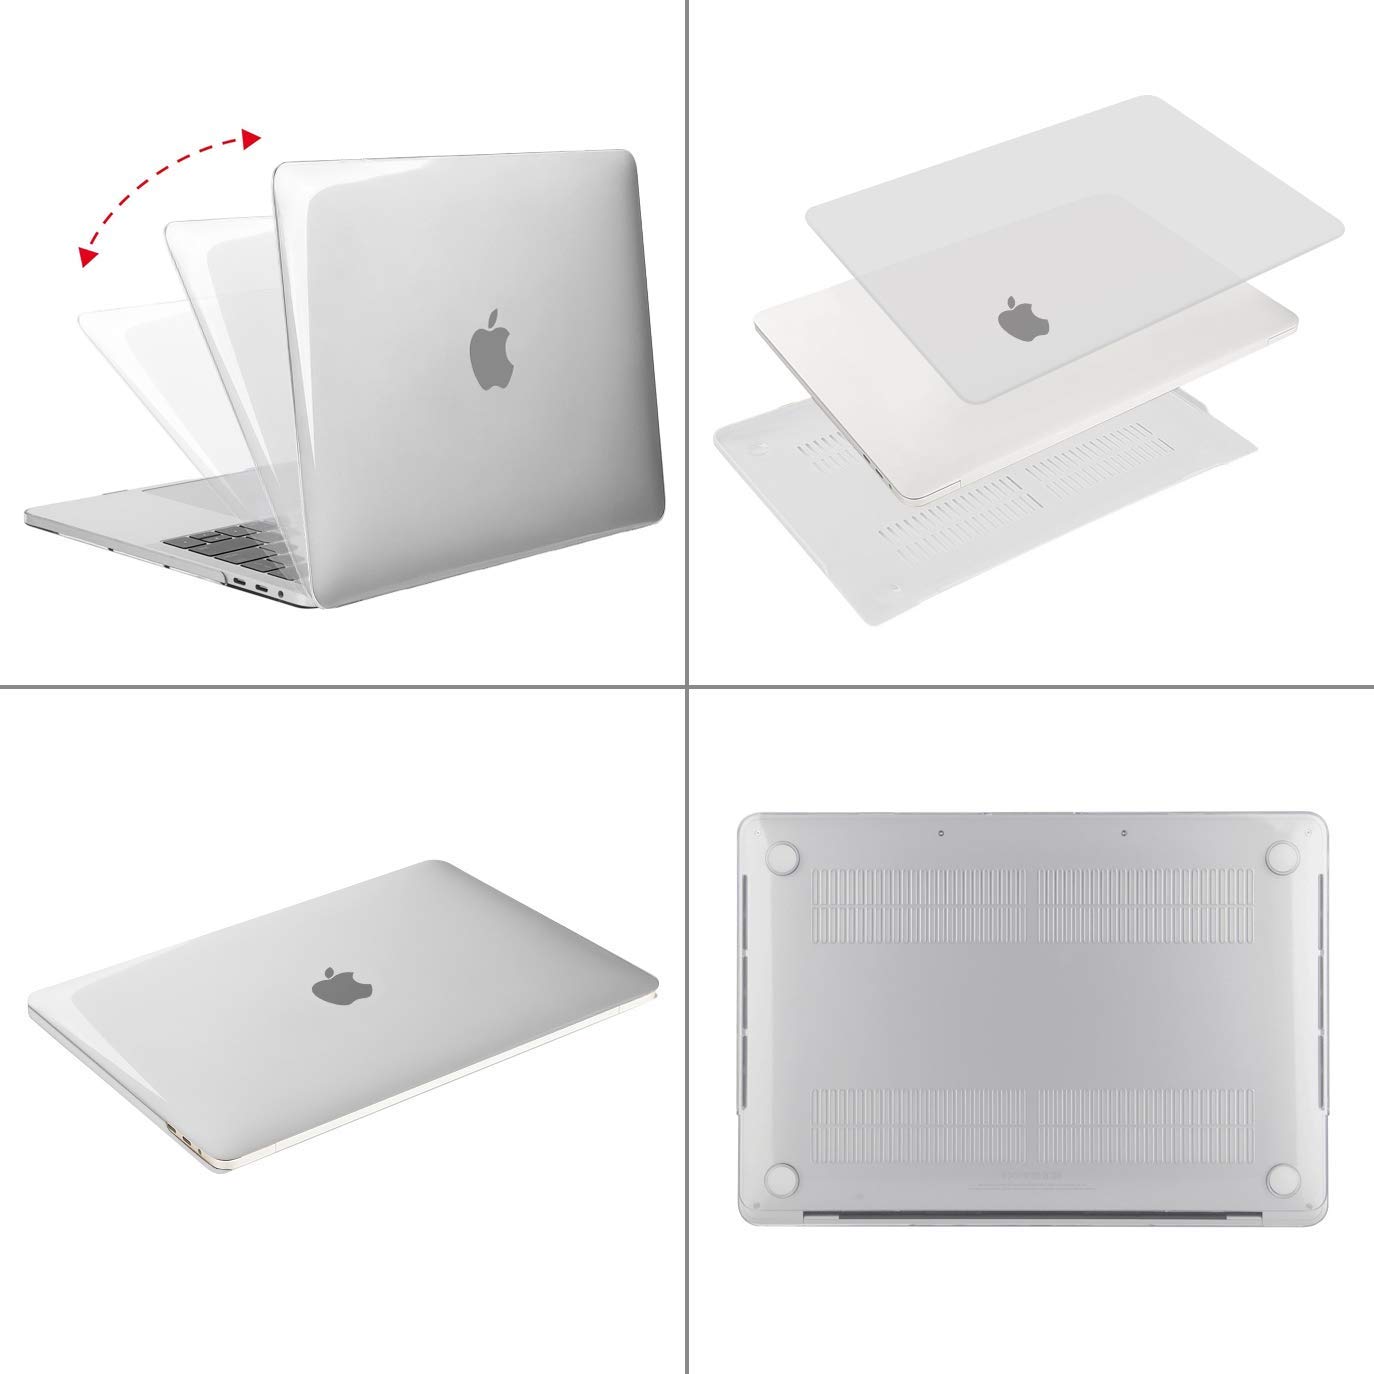 HF-MBP-CSC: MacBook Pro 13 Case 2019 2018 2017 2016 Release A2159 A1989 A1706 A1708, Plastic Hard Case Shell Cover Compatible with MacBook Pro 13 Inch with/Without Touch Bar and Touch ID, Crystal Clear